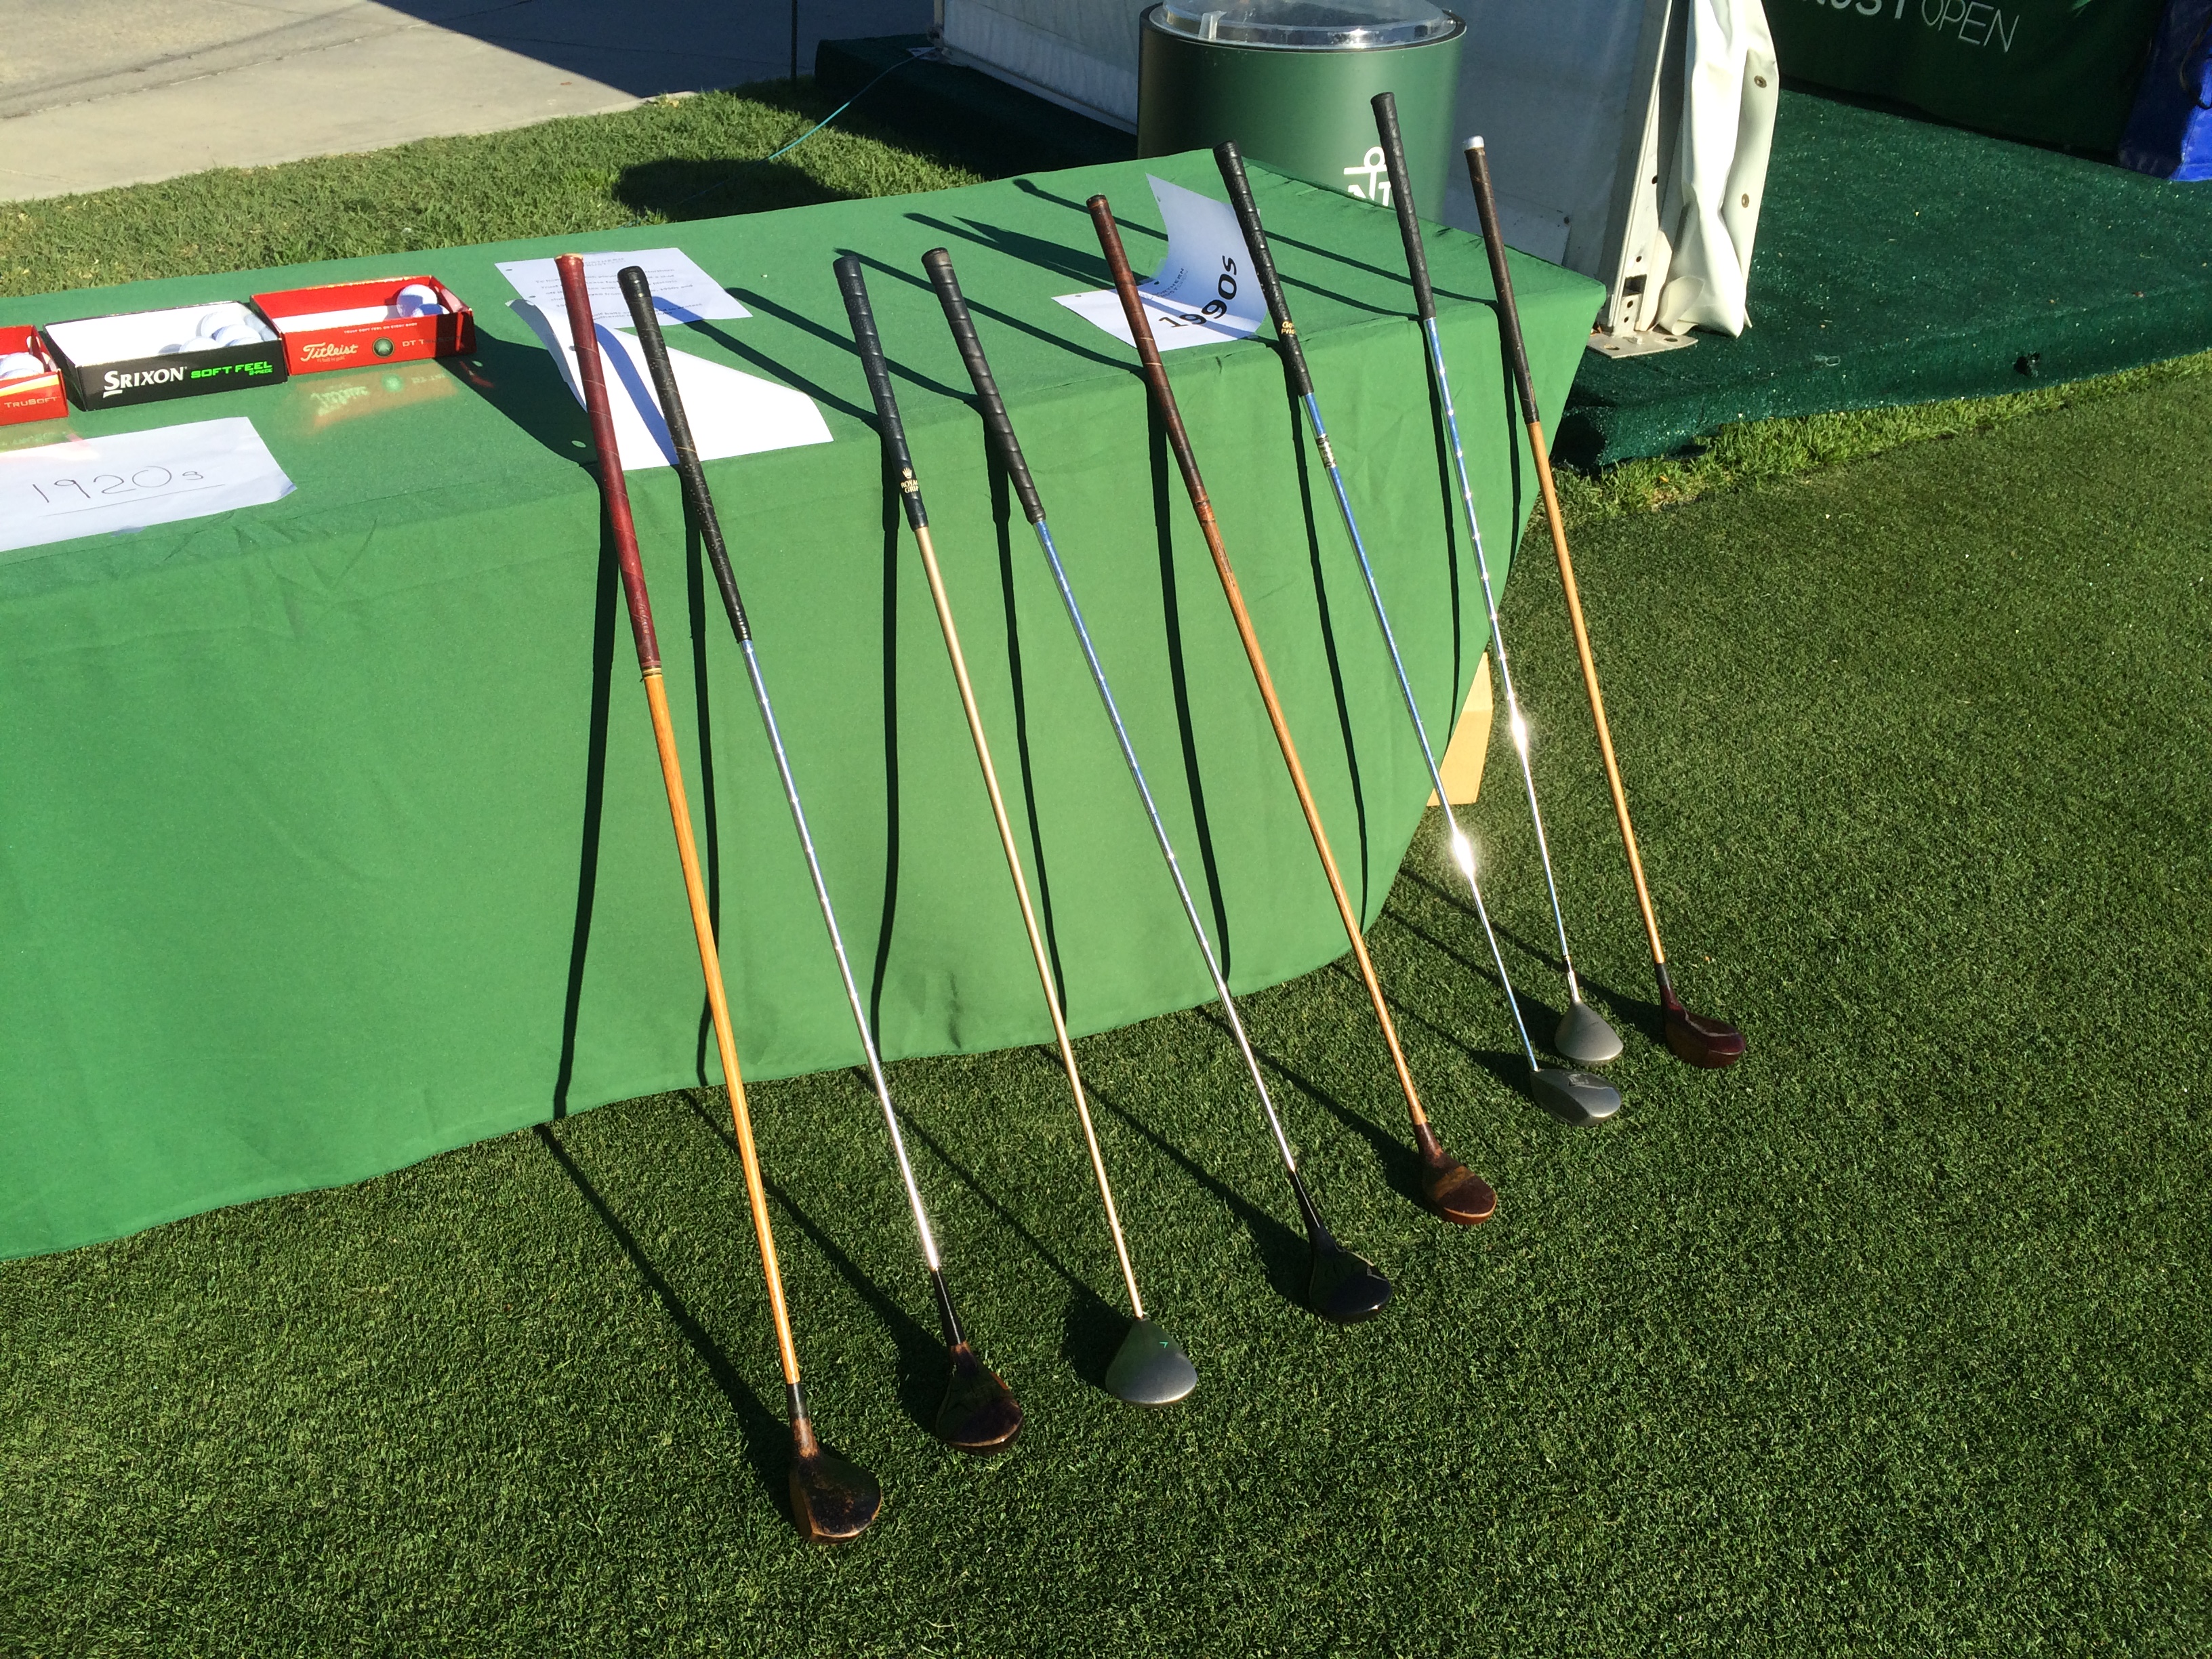 The historic golf clubs that were hit by PGA Tour pros Tuesday at Riviera's 10th hole